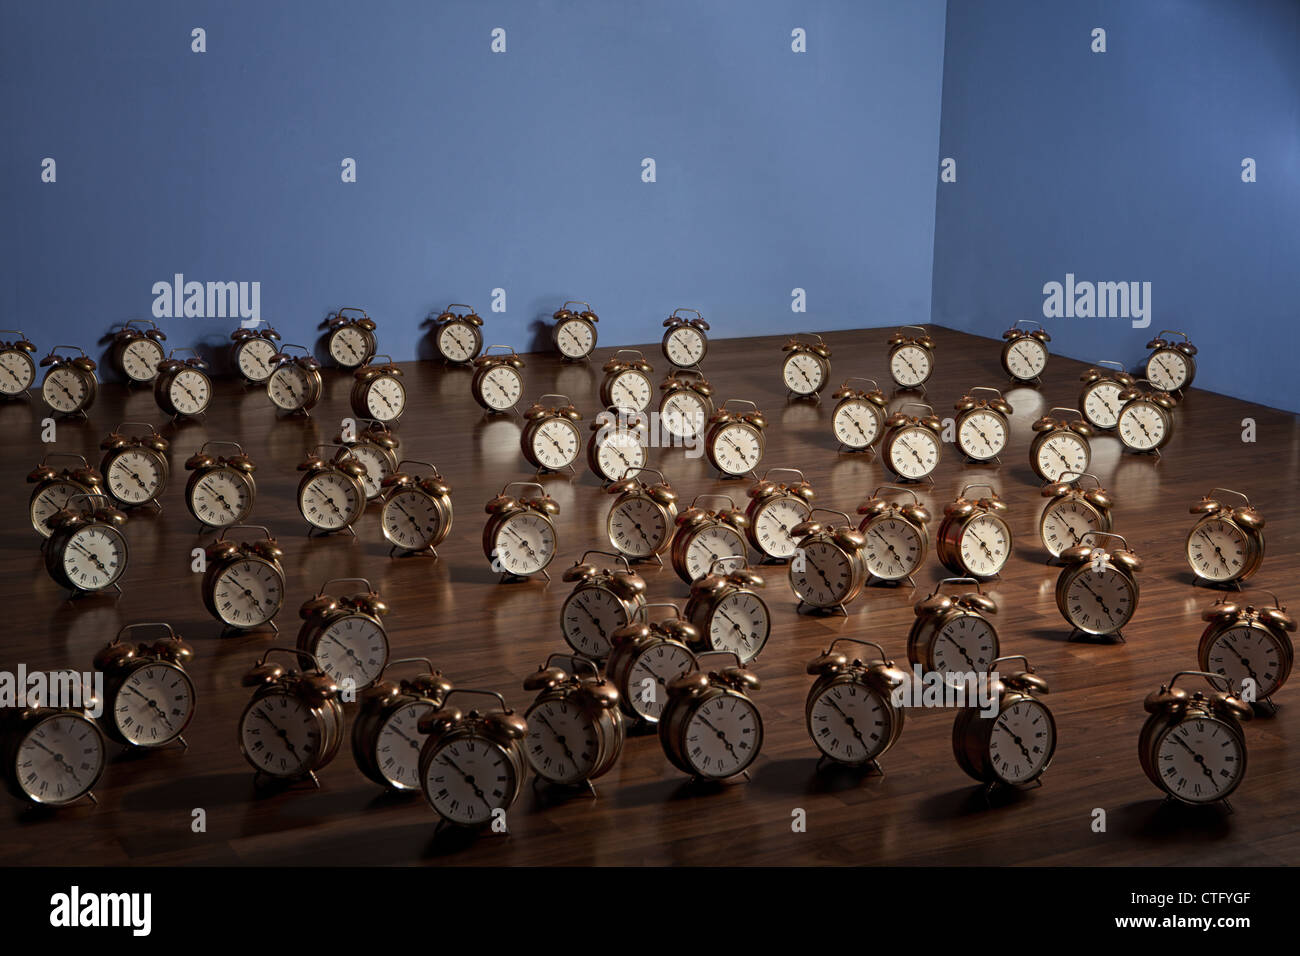 alarm,alarms,bells,brass,clock,clocks,deadlines,fashioned,floor,hours,many,metal,minutes,multiple,numbers,old,retro,ringers,rows,time,timers,vintage,wood,wooden Stock Photo